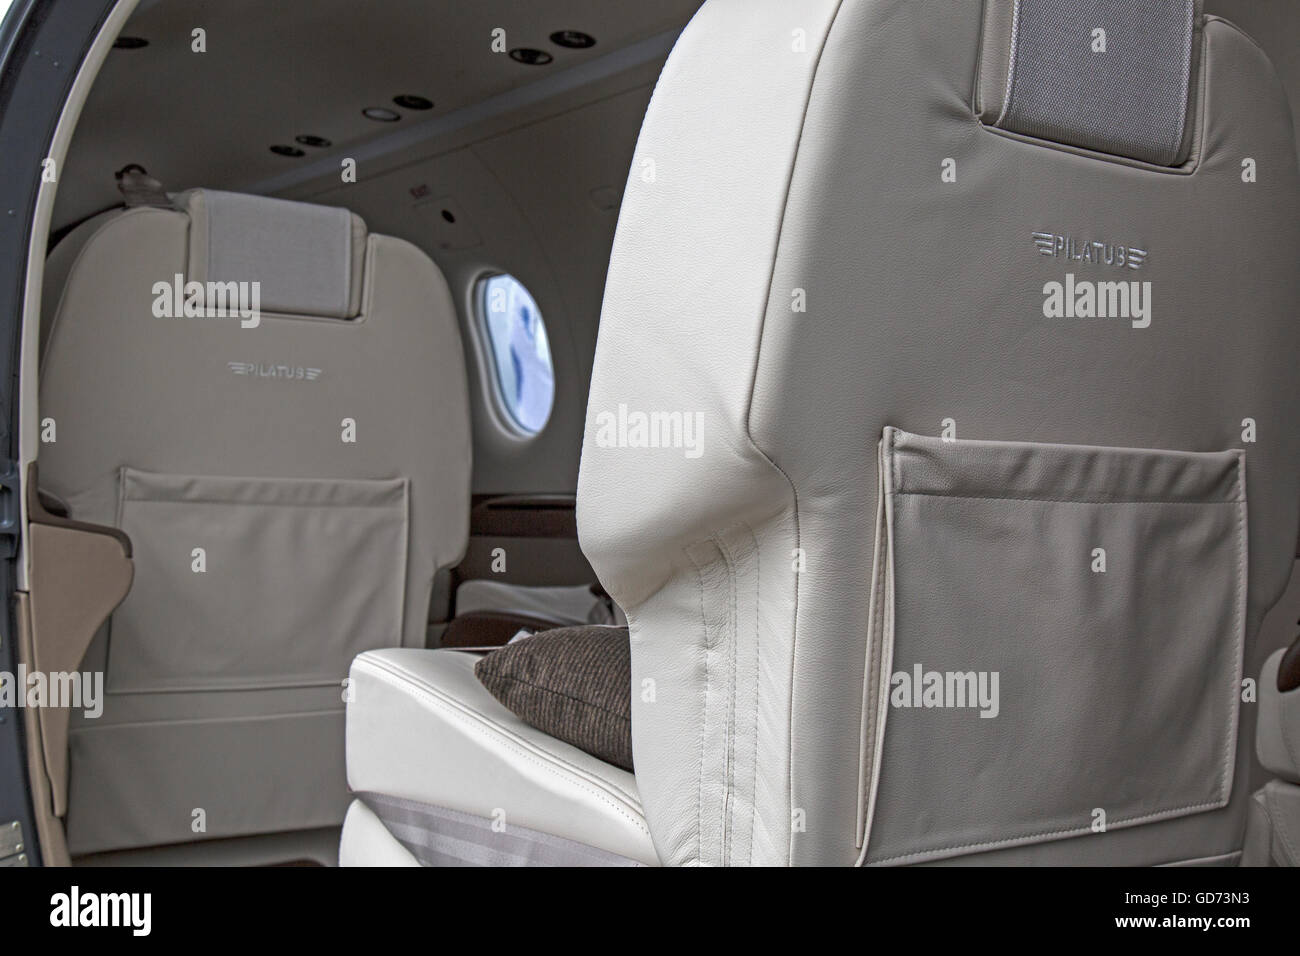 View of the interior of a Pilatus PC-12/47 executive airplane, showing seating. Stock Photo